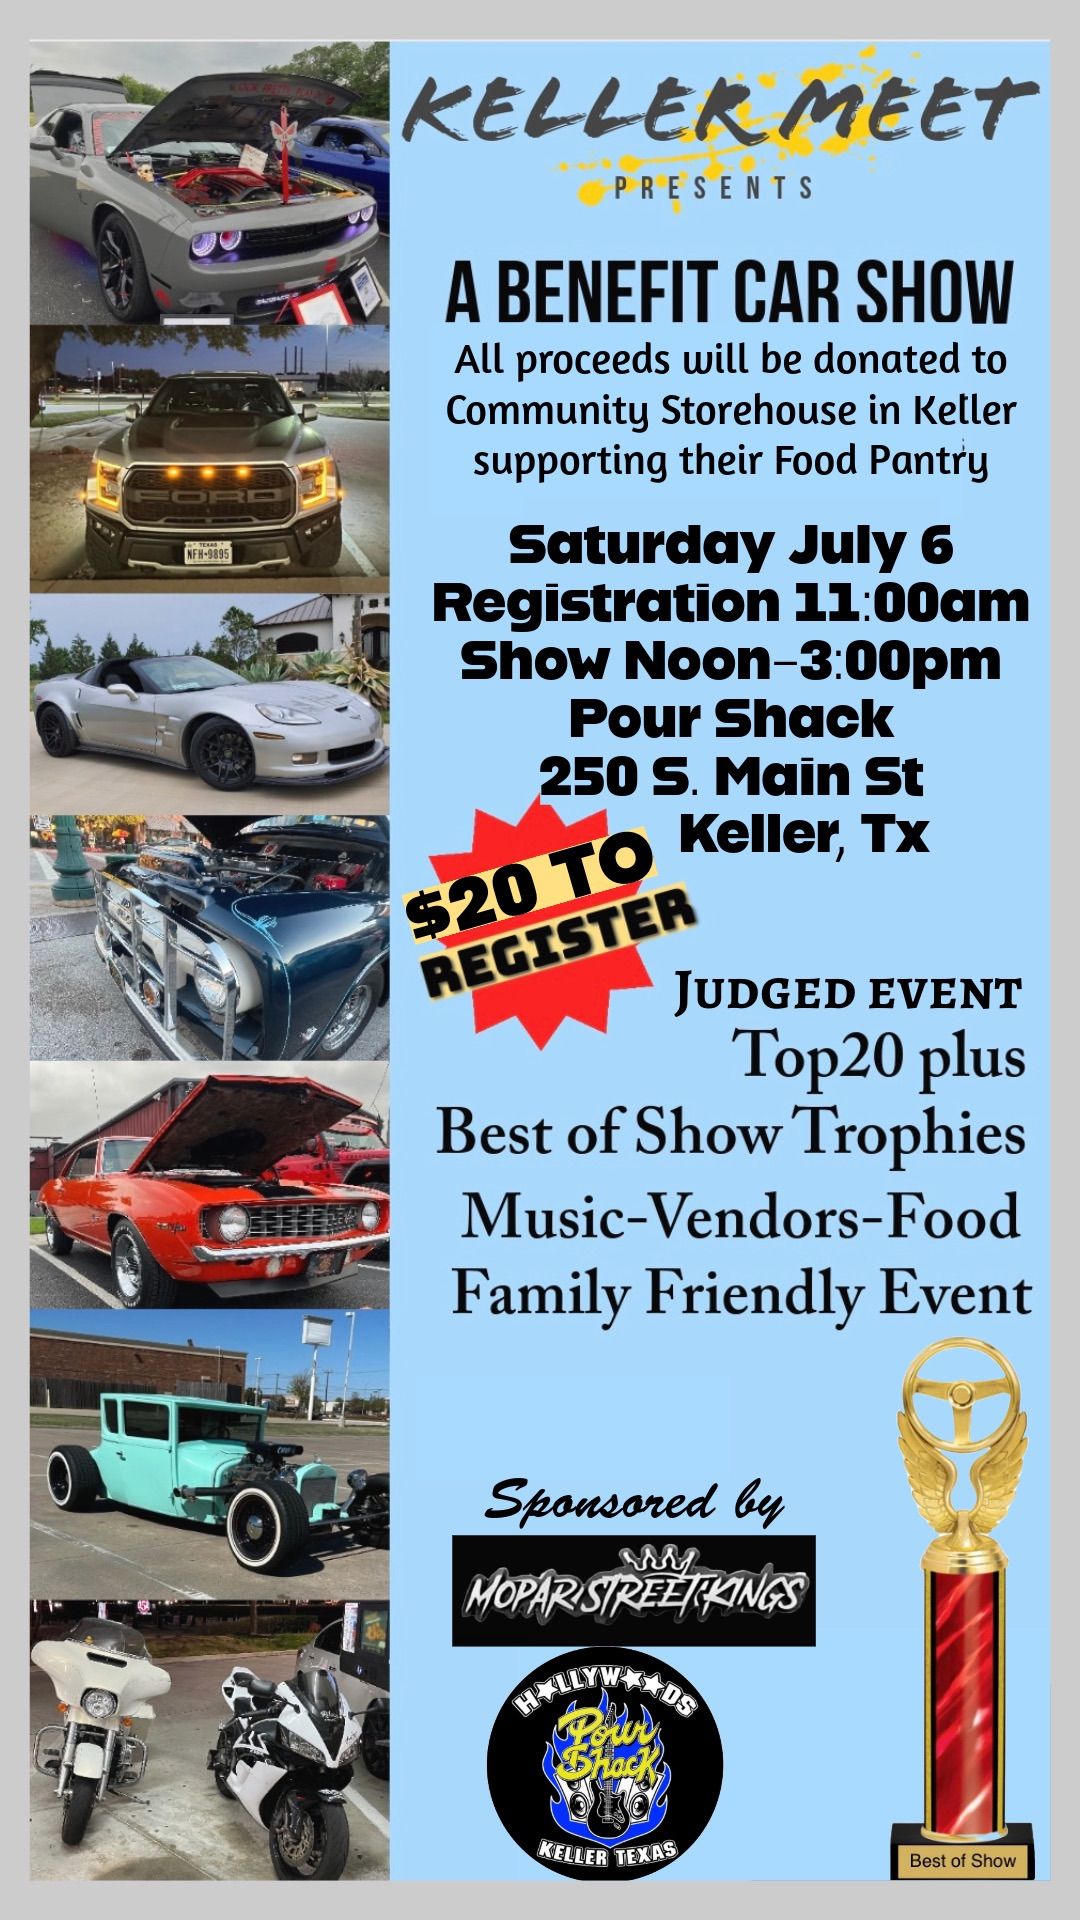 Benefit Car Show Presented by Keller Meets